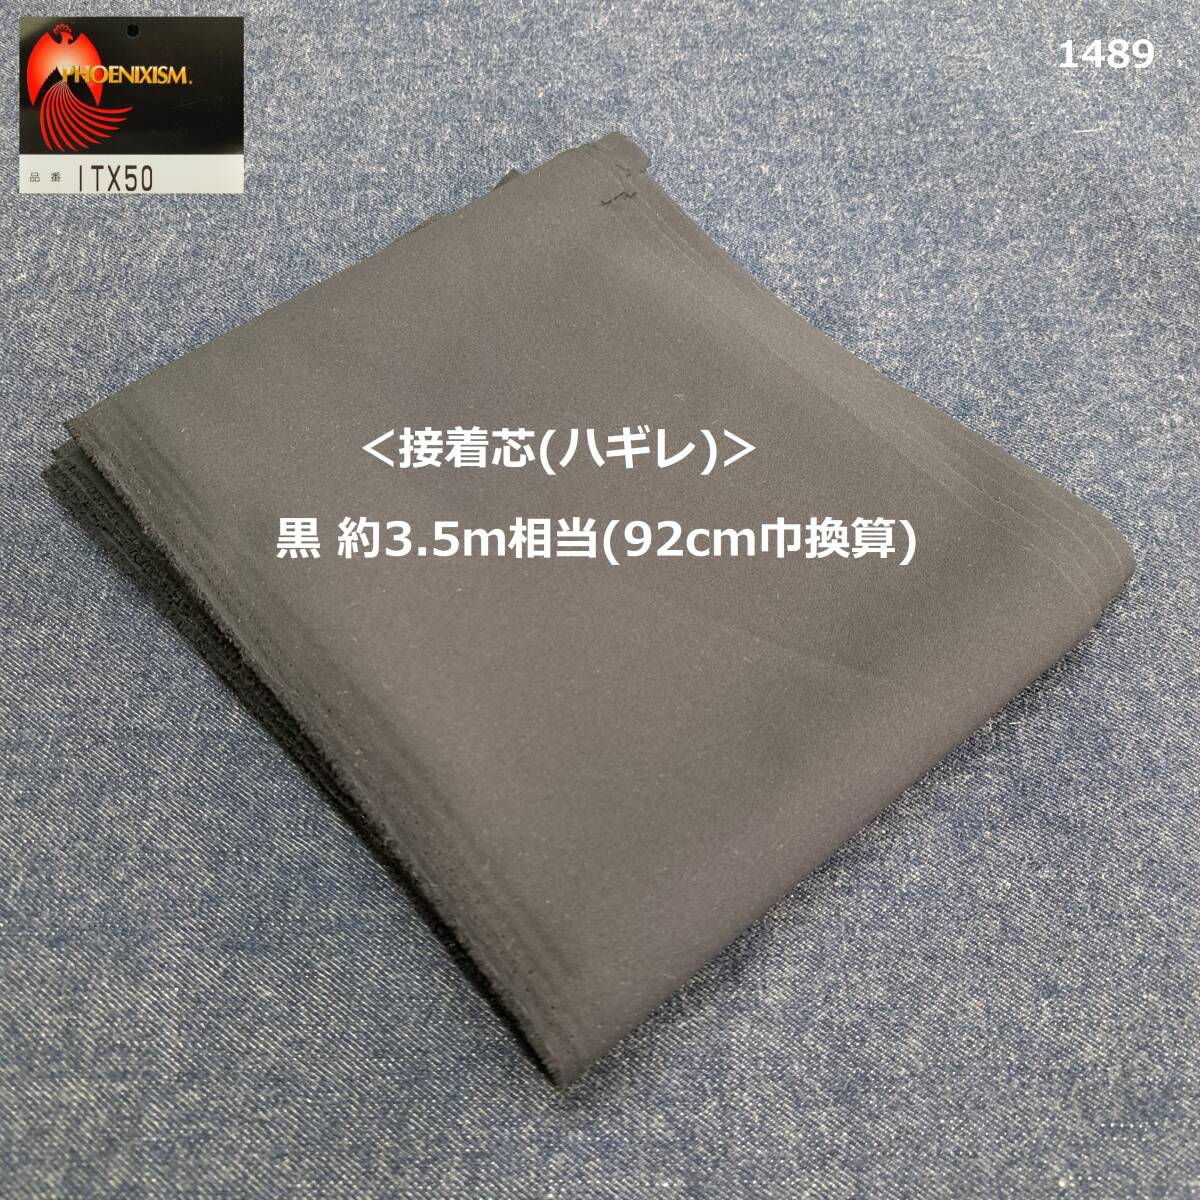 1489< bonding core ( is gire)> black approximately 3.5m corresponding (92cm width equivalent )* polyester 100%*ITX50* smooth & soft .& middle meat & a little flexible * hand made .!